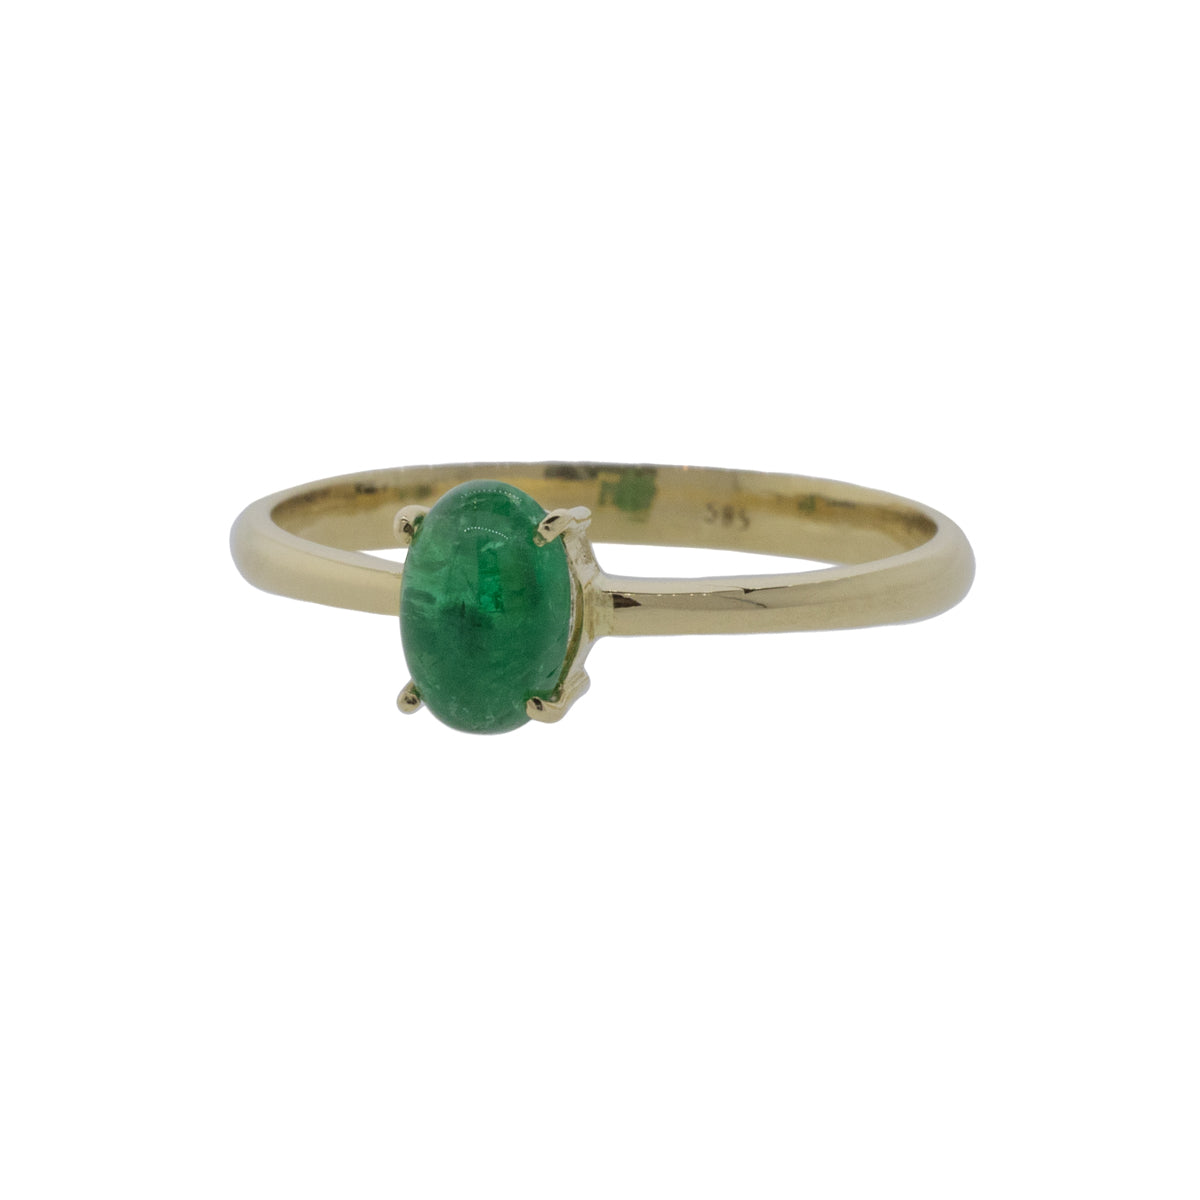 Cabochon Cut Emerald Solitaire Ring